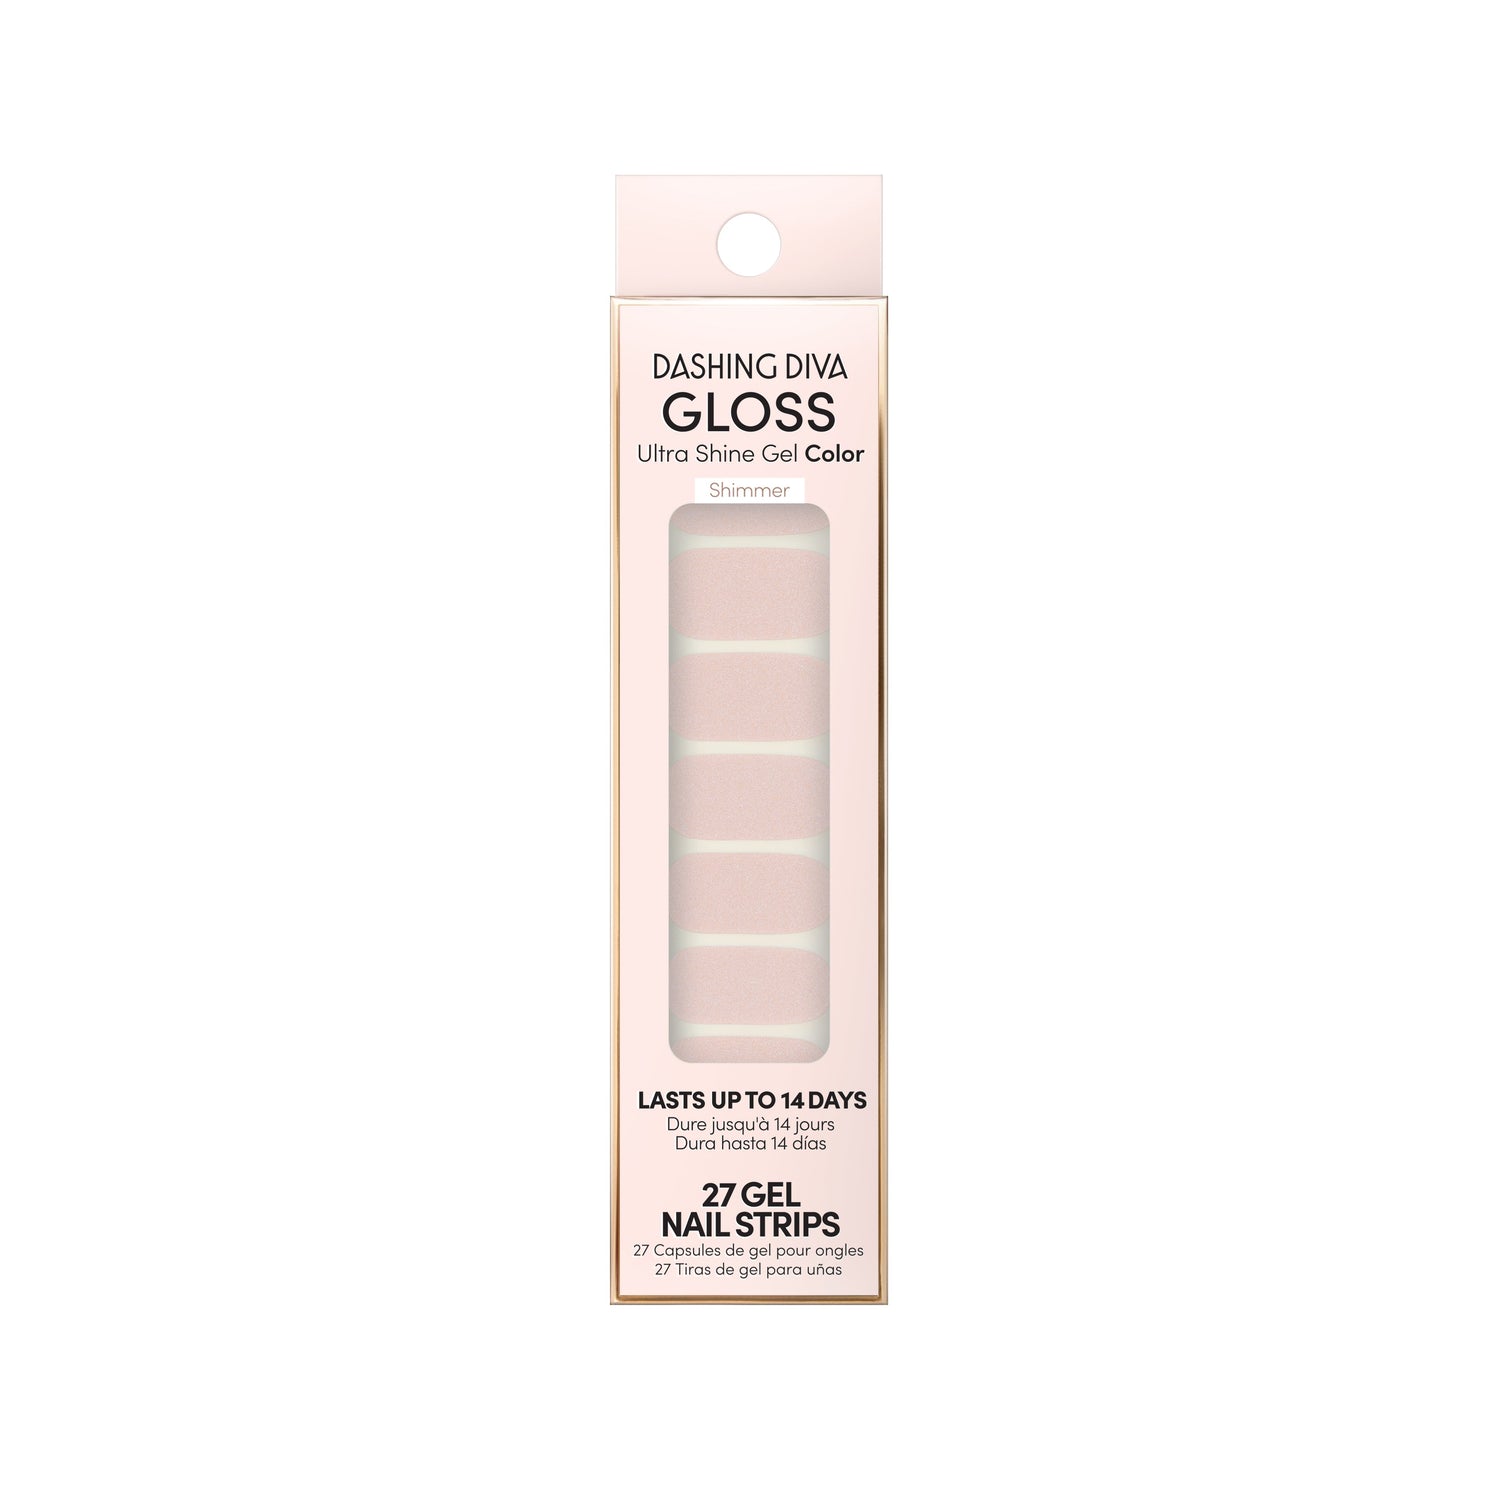 Dashing Diva GLOSS Color classic baby pink shimmer finish gel nail strips.